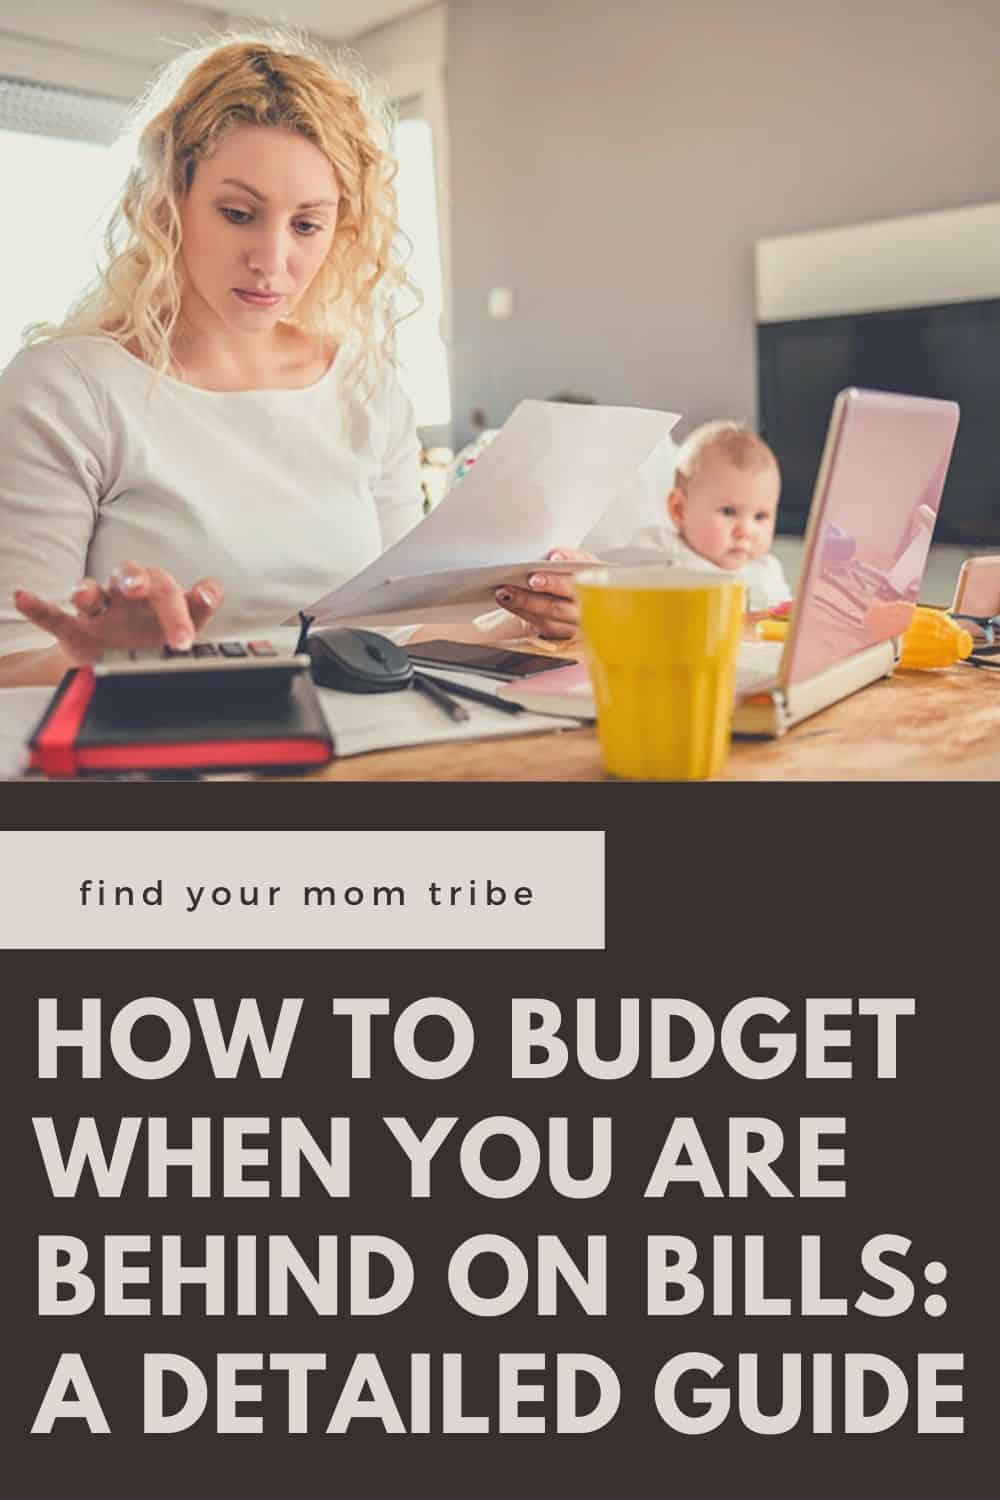 How to Budget When You Are Behind on Bills: A Detailed Guide